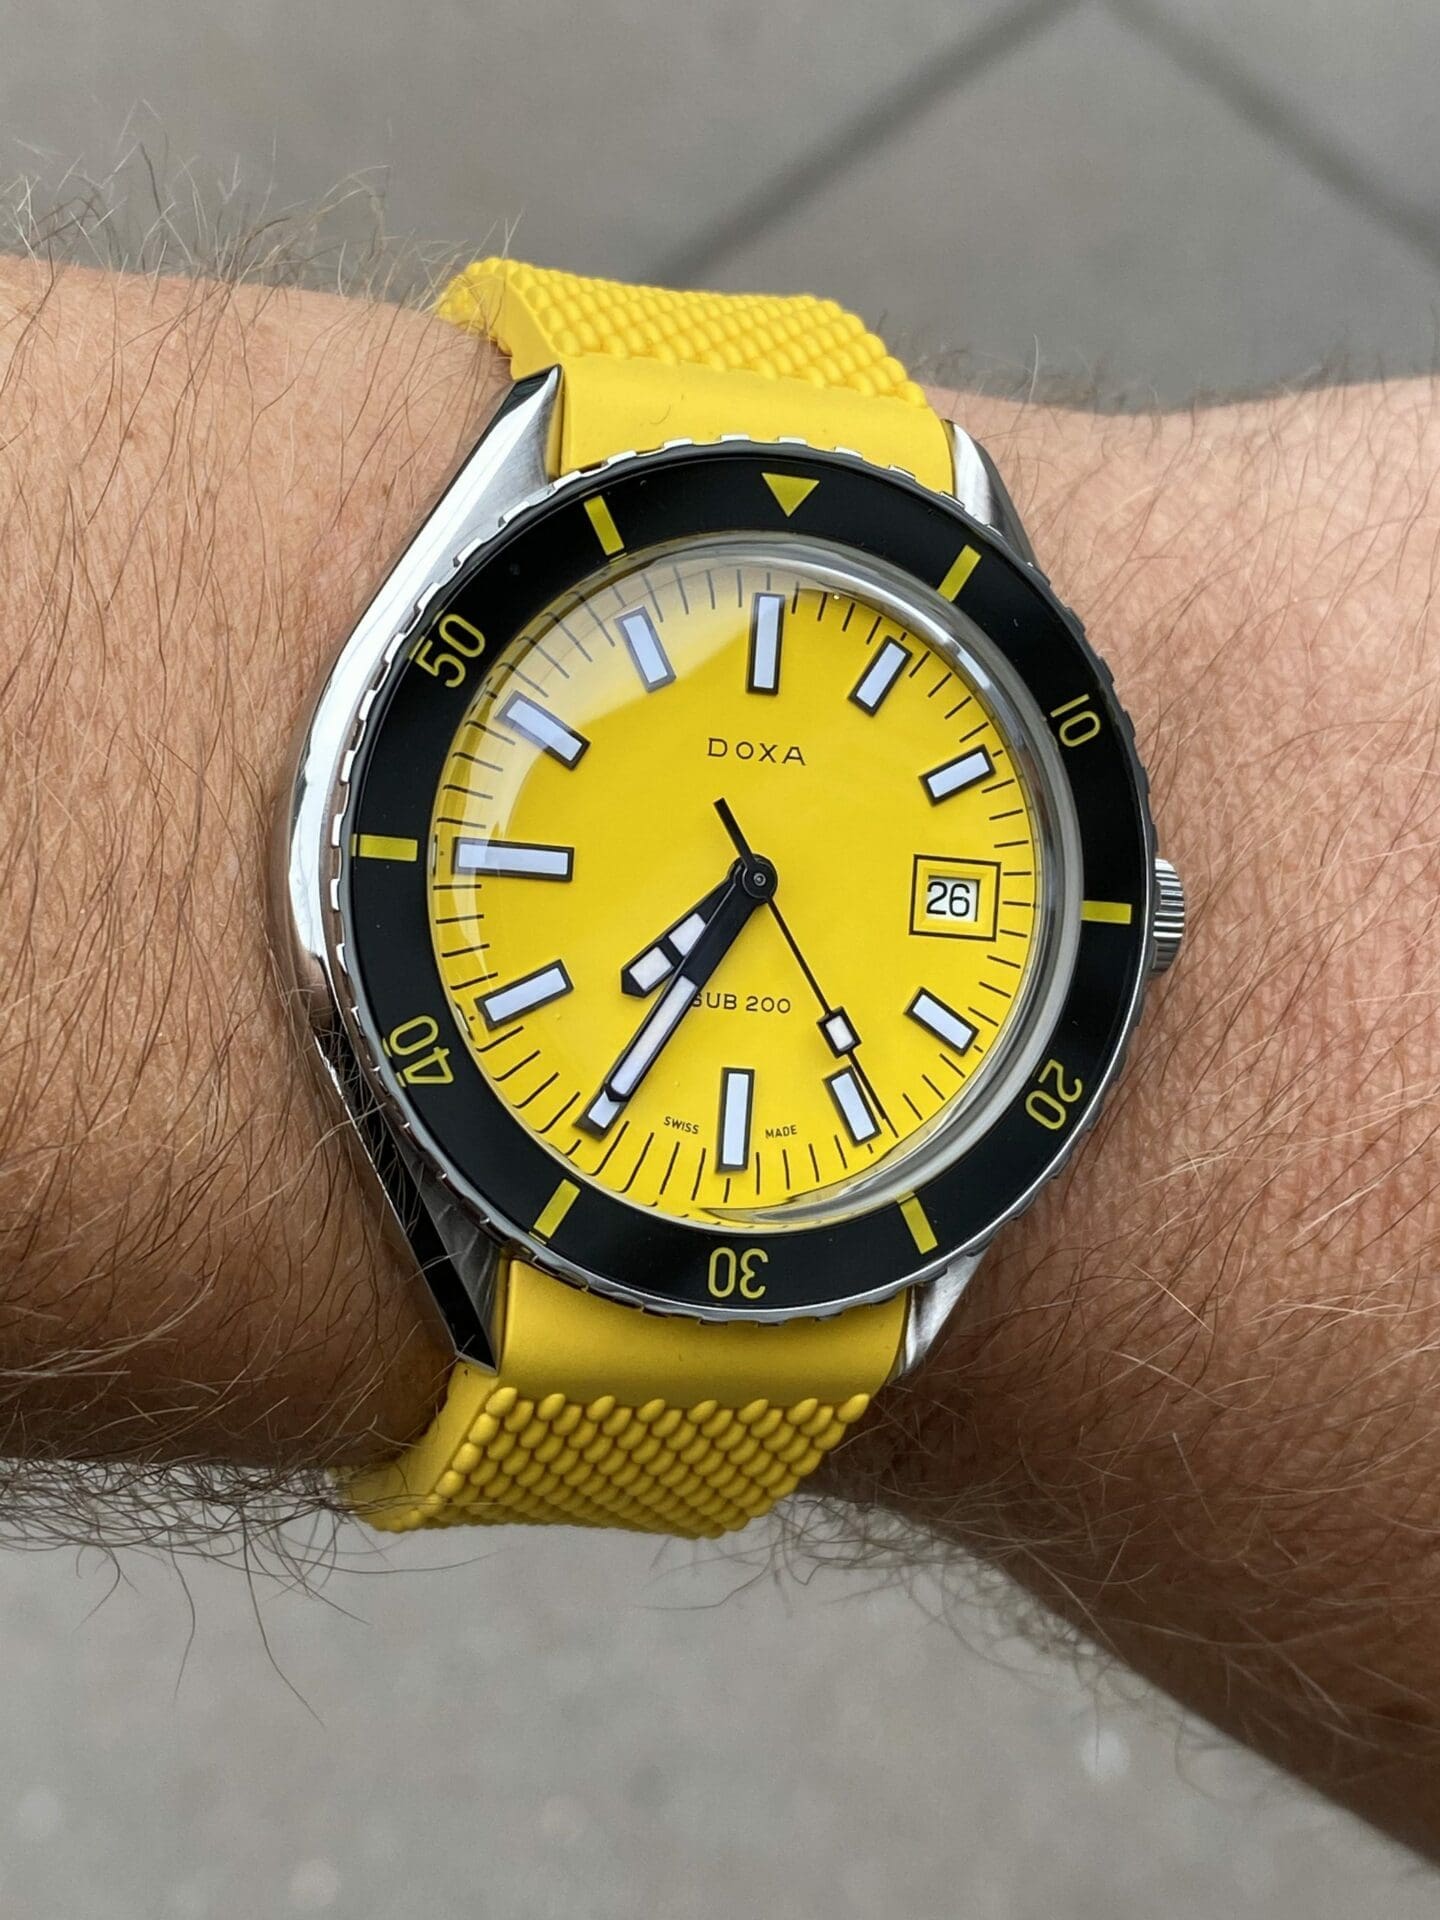 First look at the DOXA SUB 200 on summer-ready rubber straps